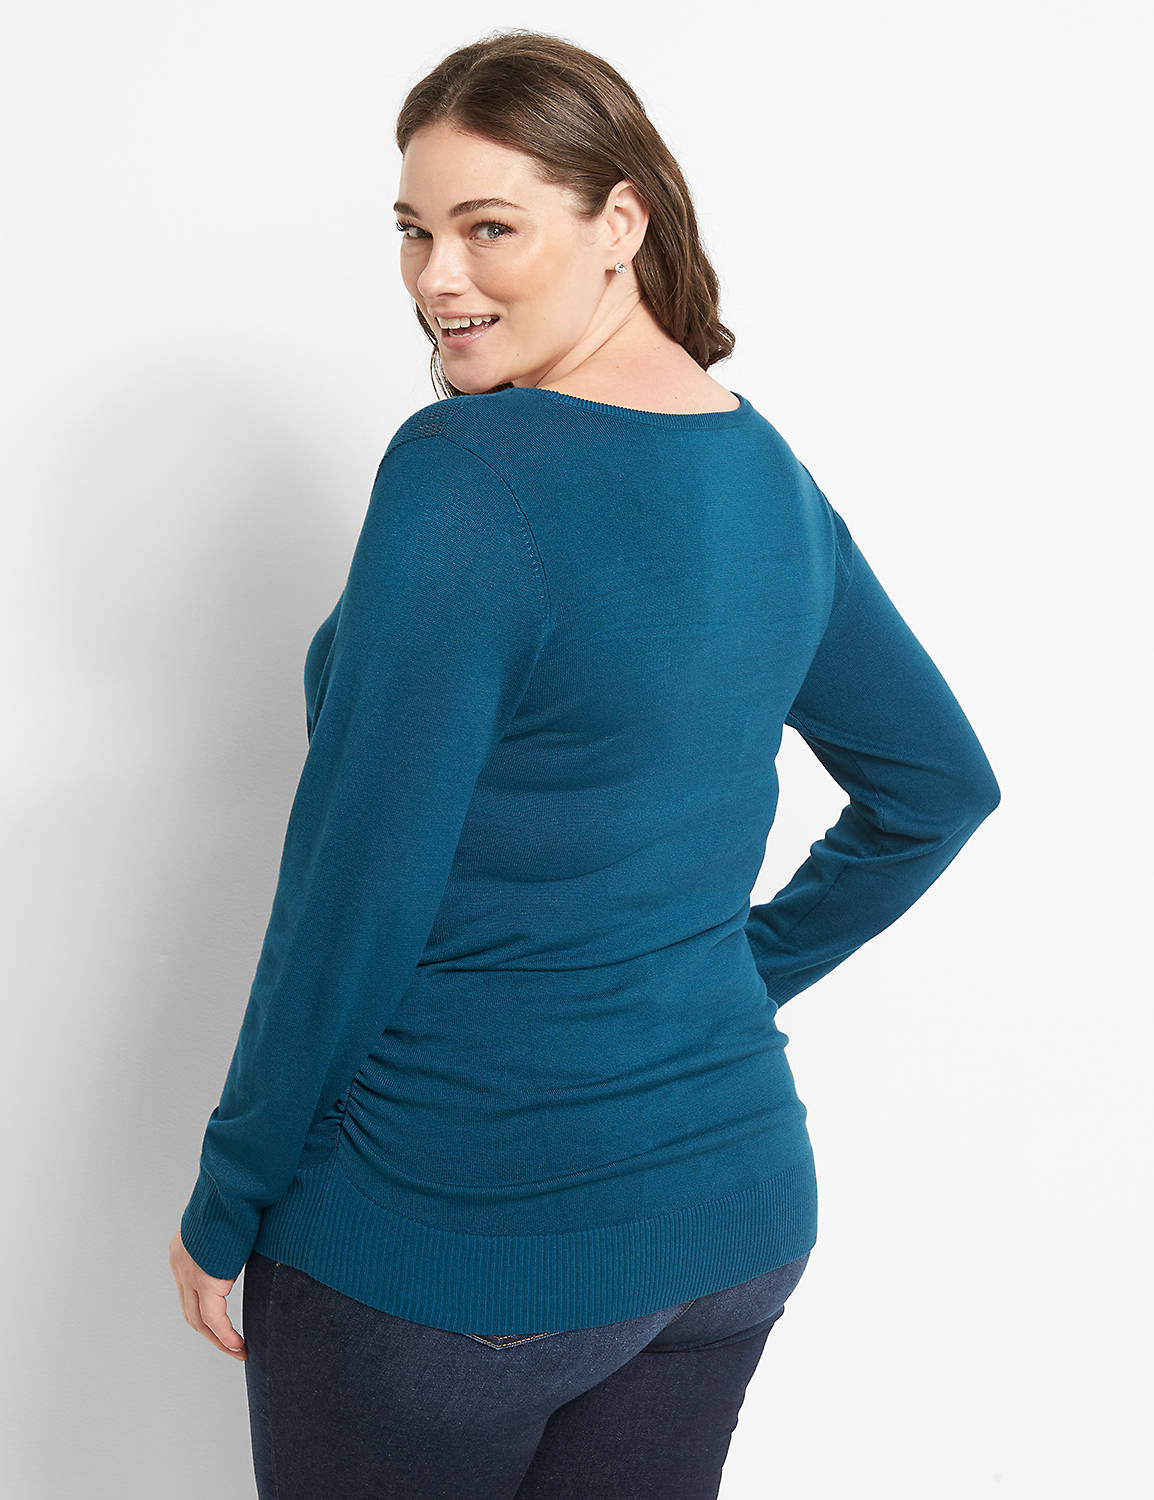 Ruched-Side Sweater - Pointelle Product Image 2